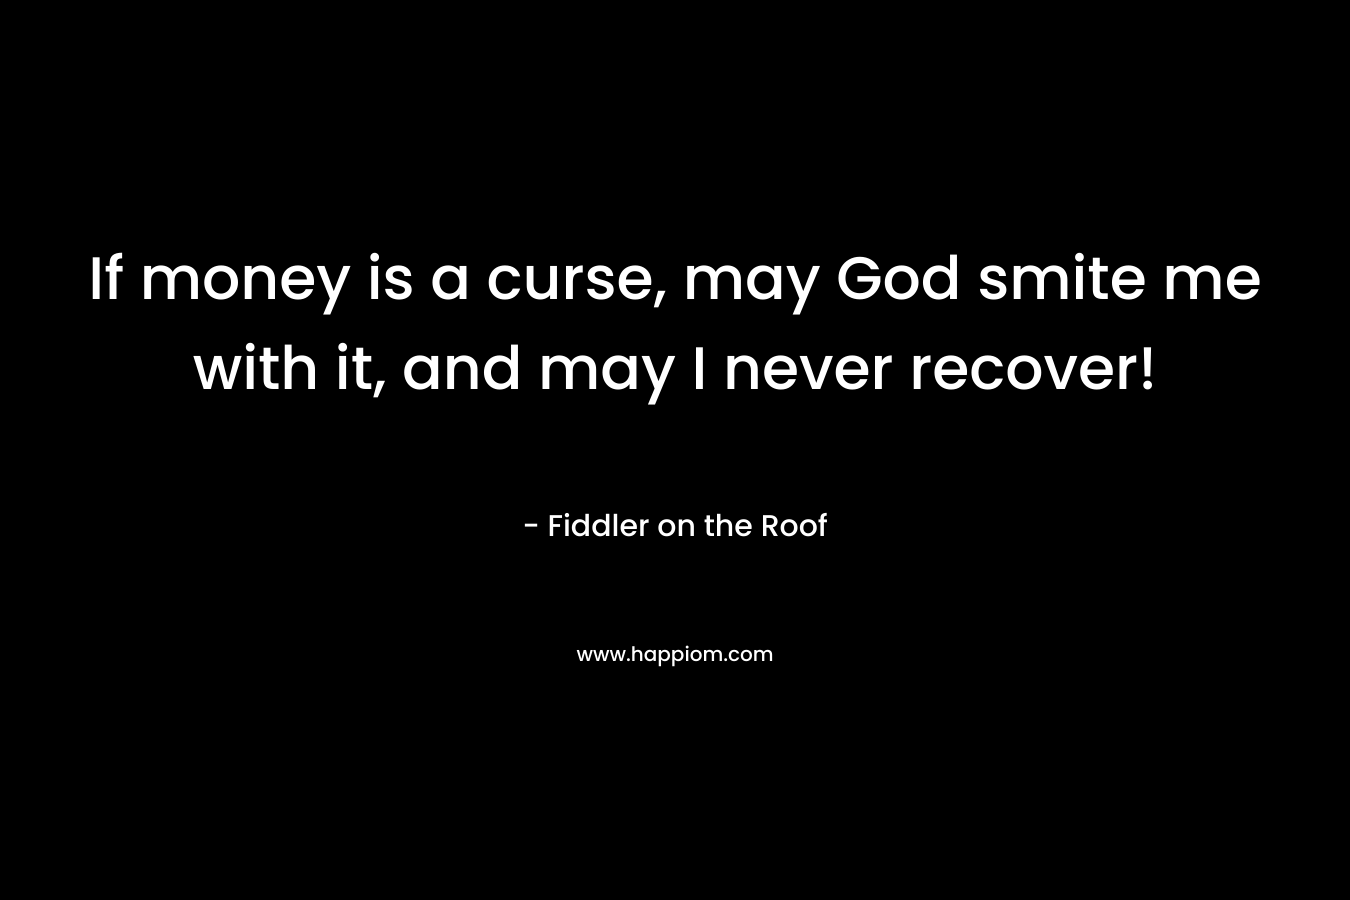 If money is a curse, may God smite me with it, and may I never recover! – Fiddler on the Roof